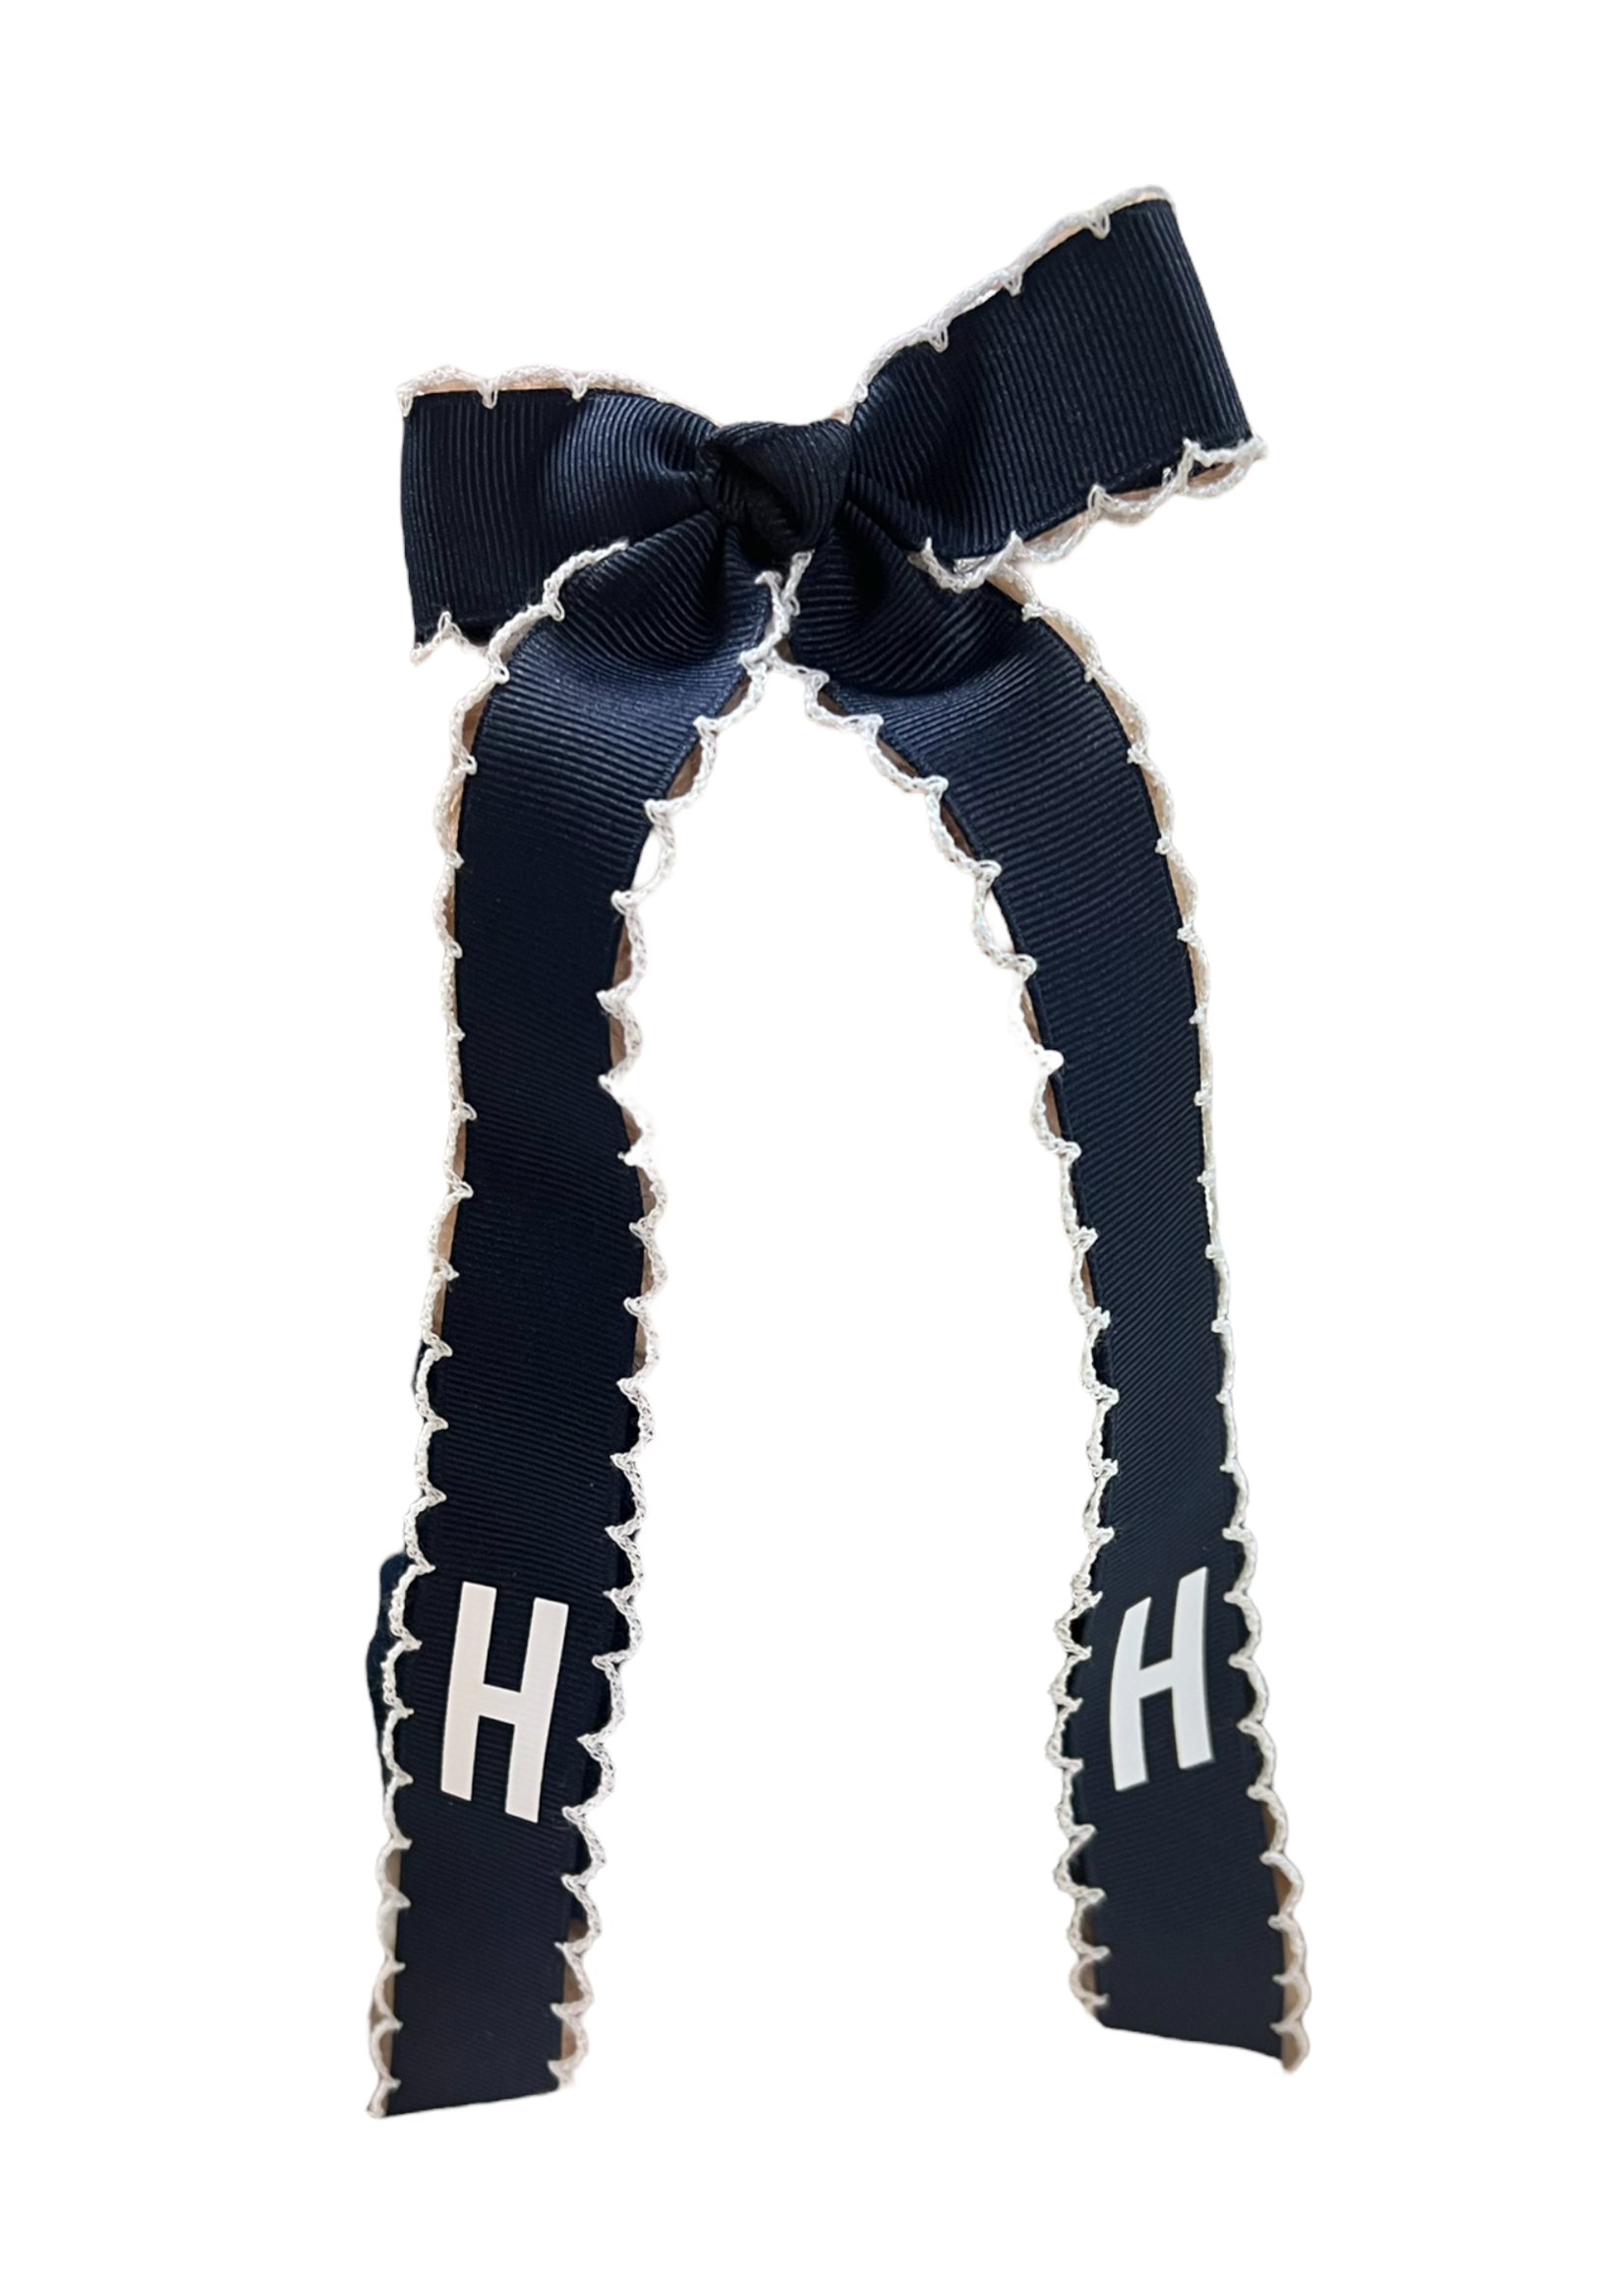 Wee Ones Med Moonstitch Navy Bow w/ White Stitch w/ tails